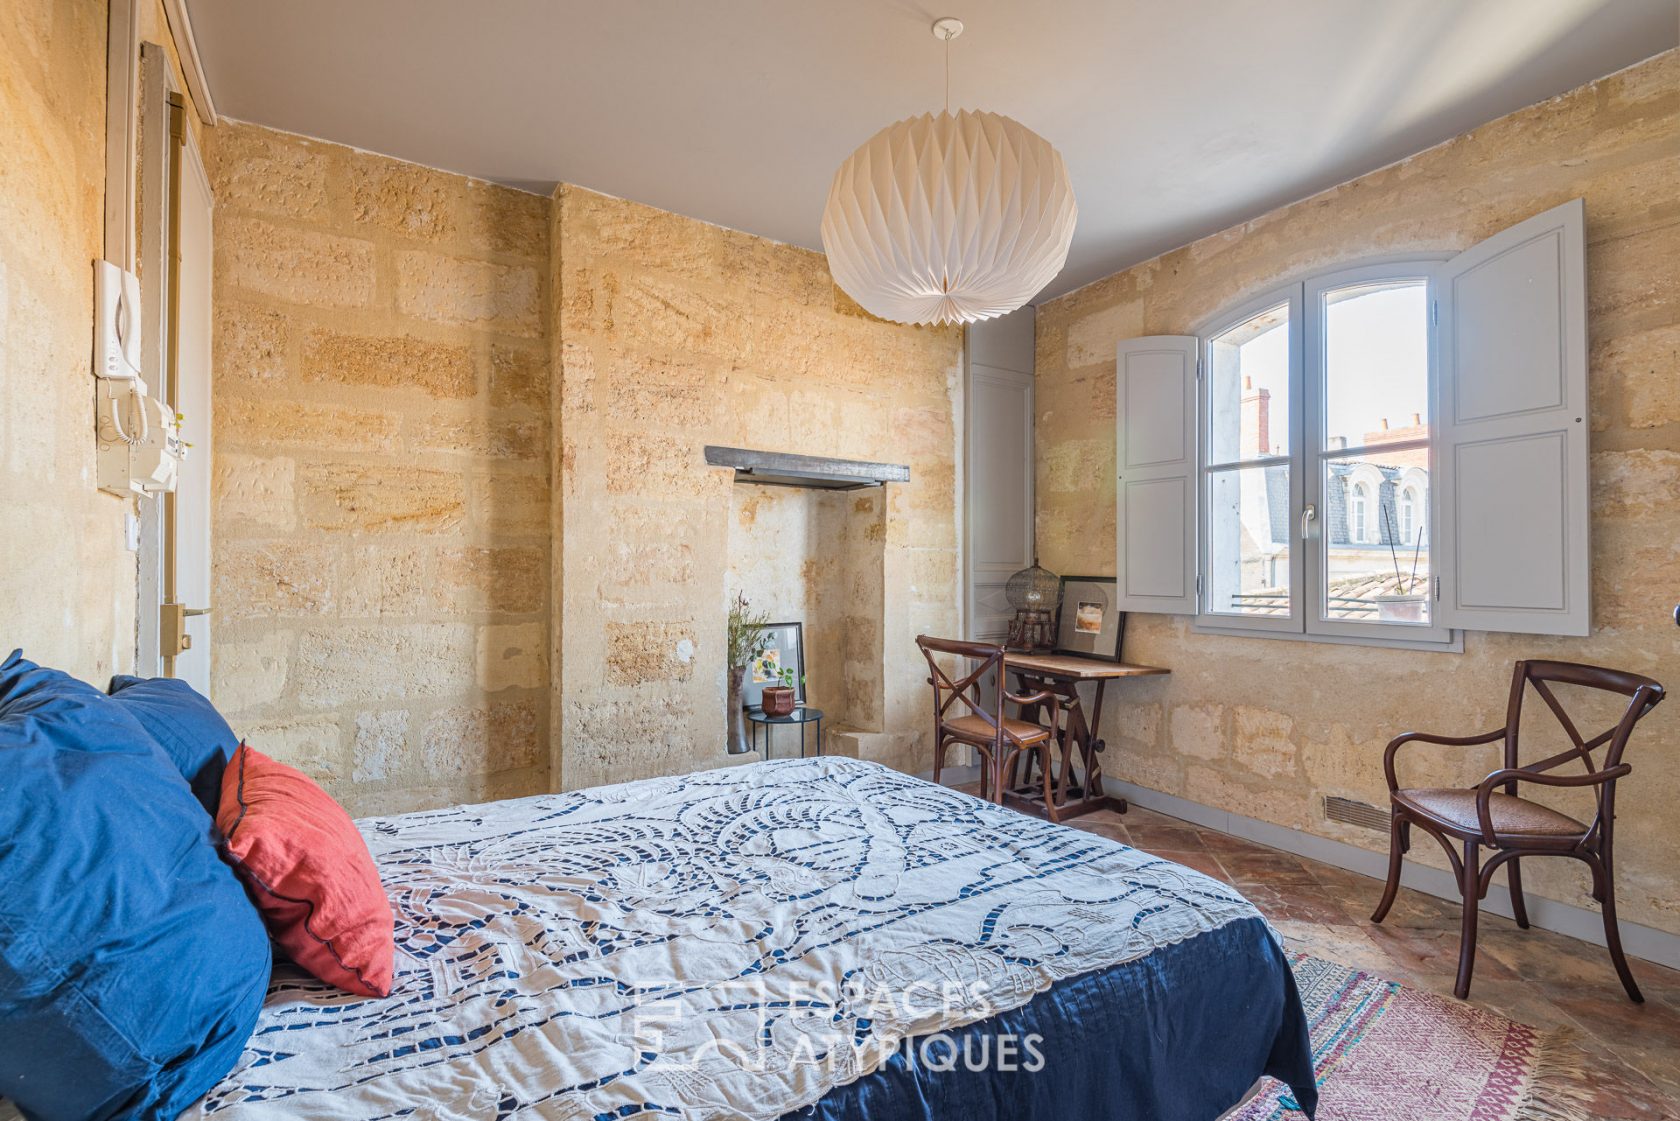 Original apartment revisited by architect in St Michel